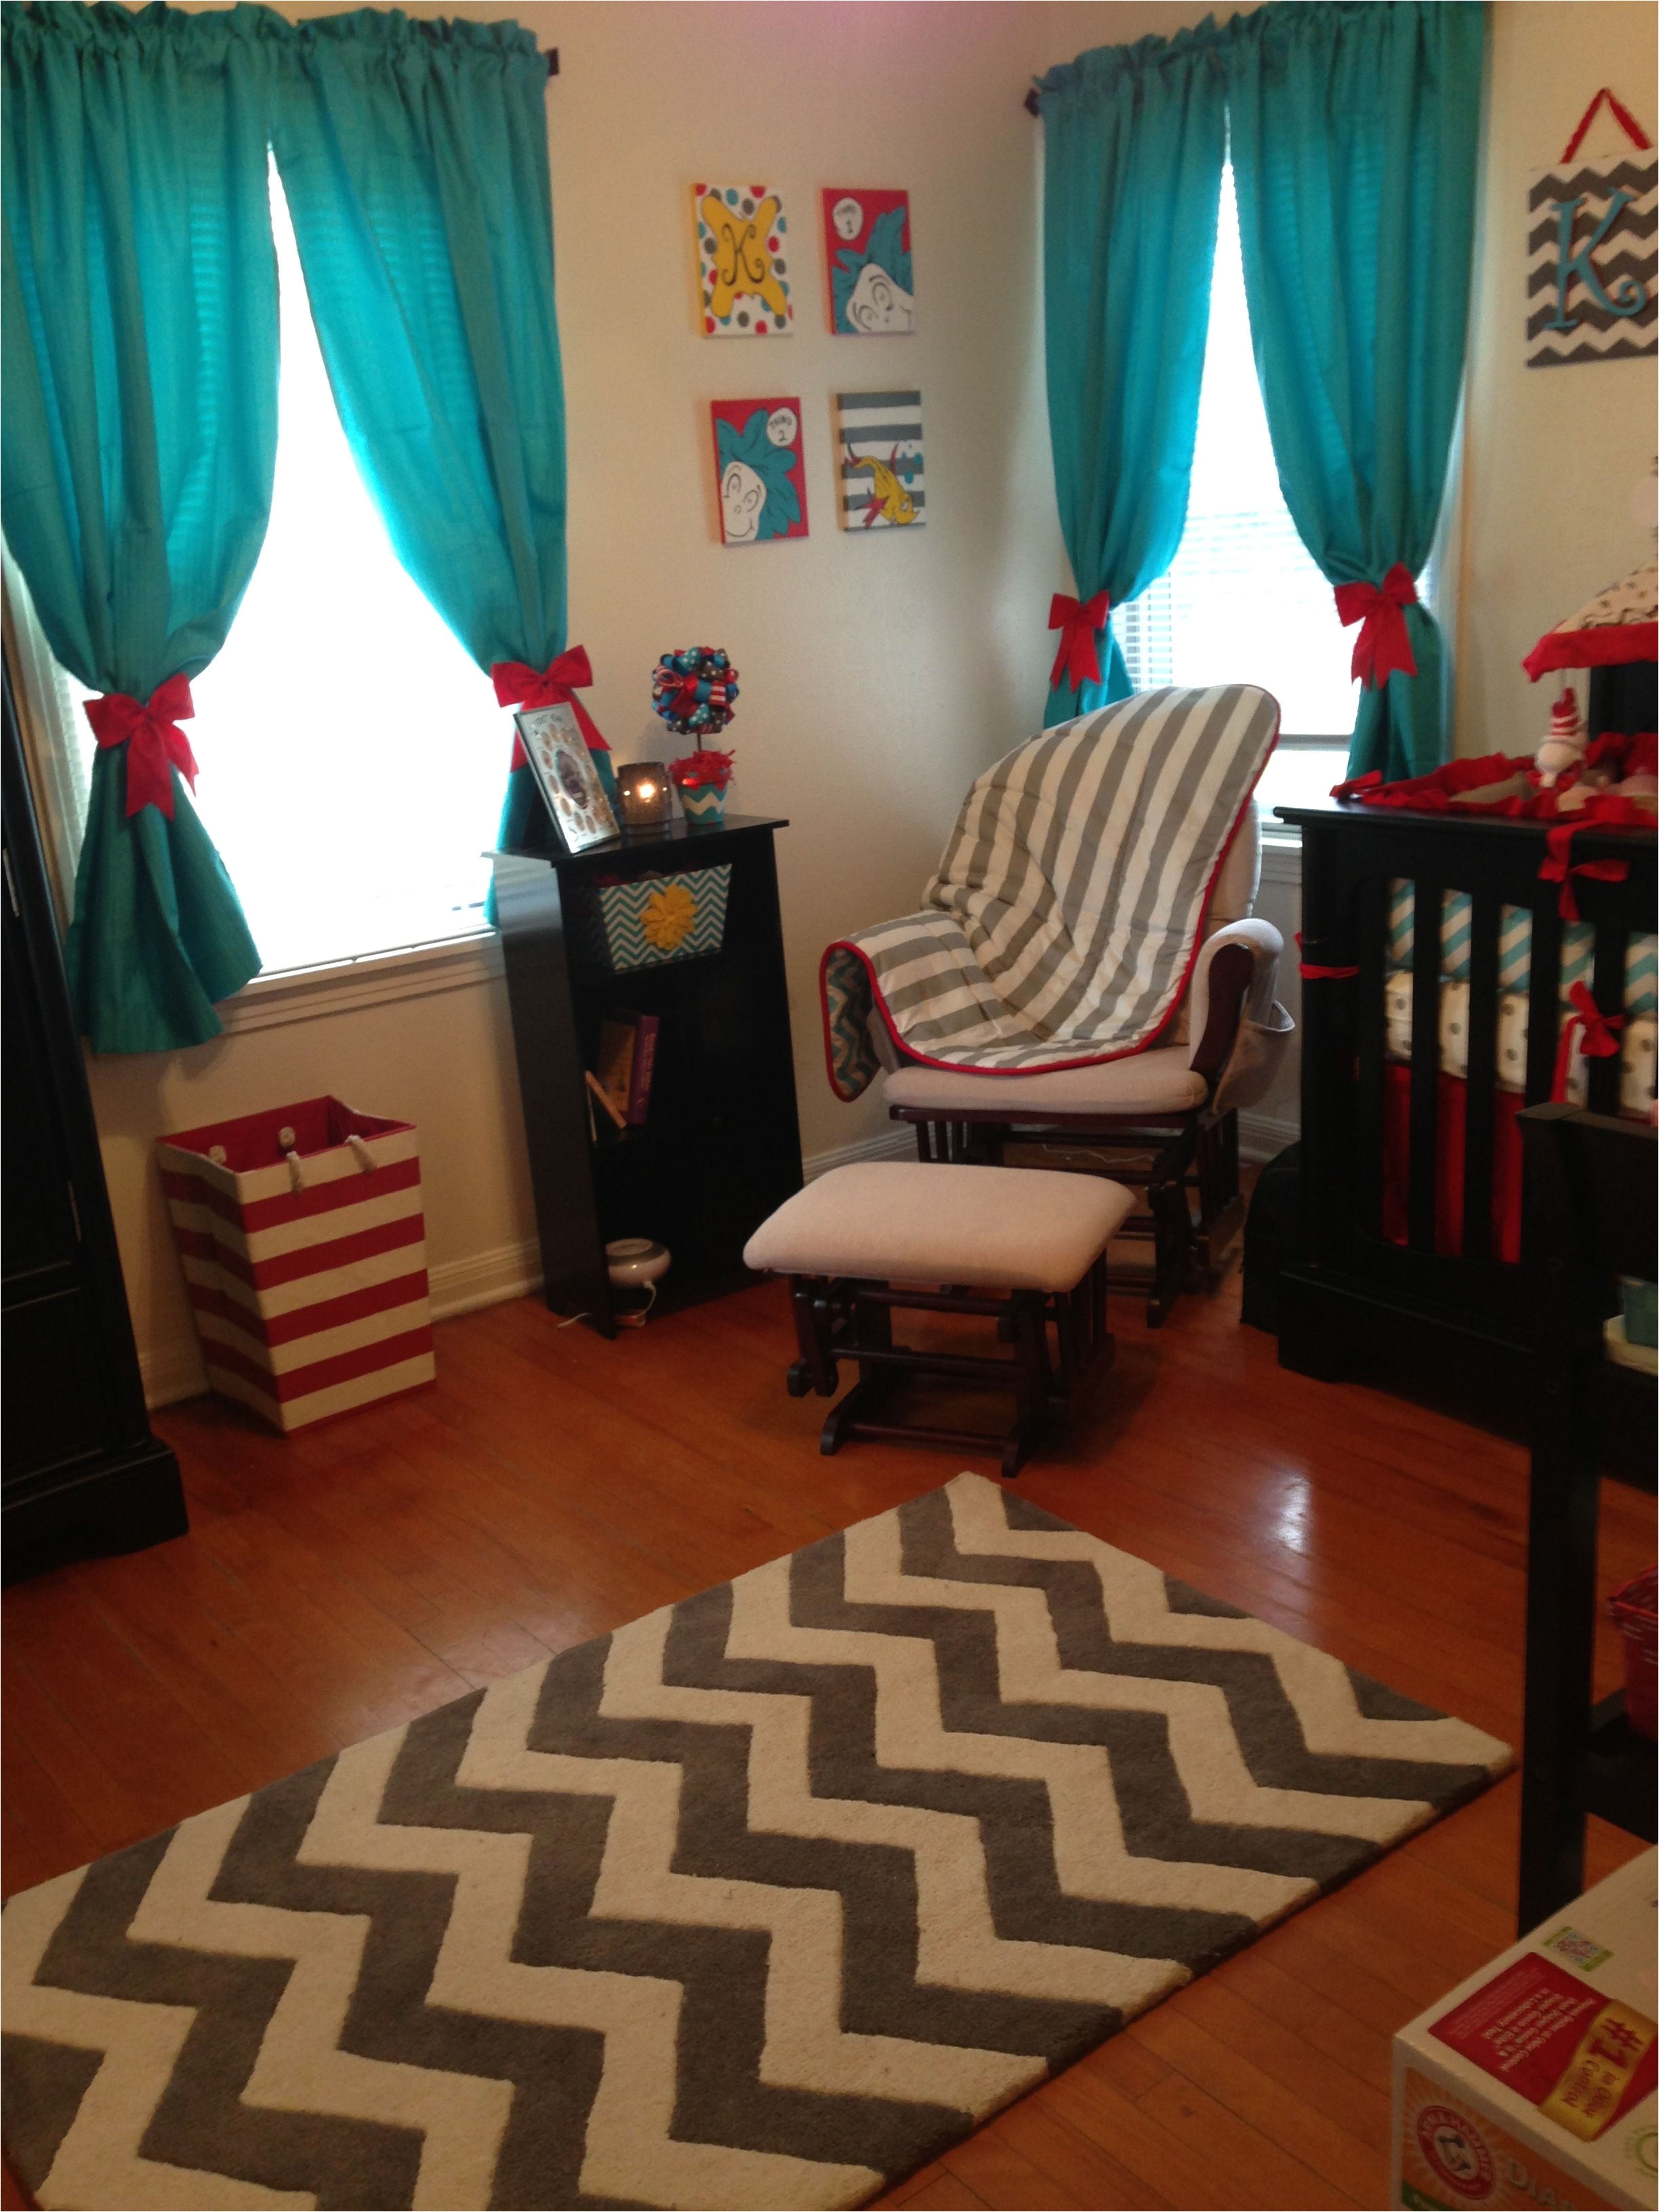 dr seuss nursery i was going to do gray chevron and yellow but a little classy dr seuss splashed in could be fun